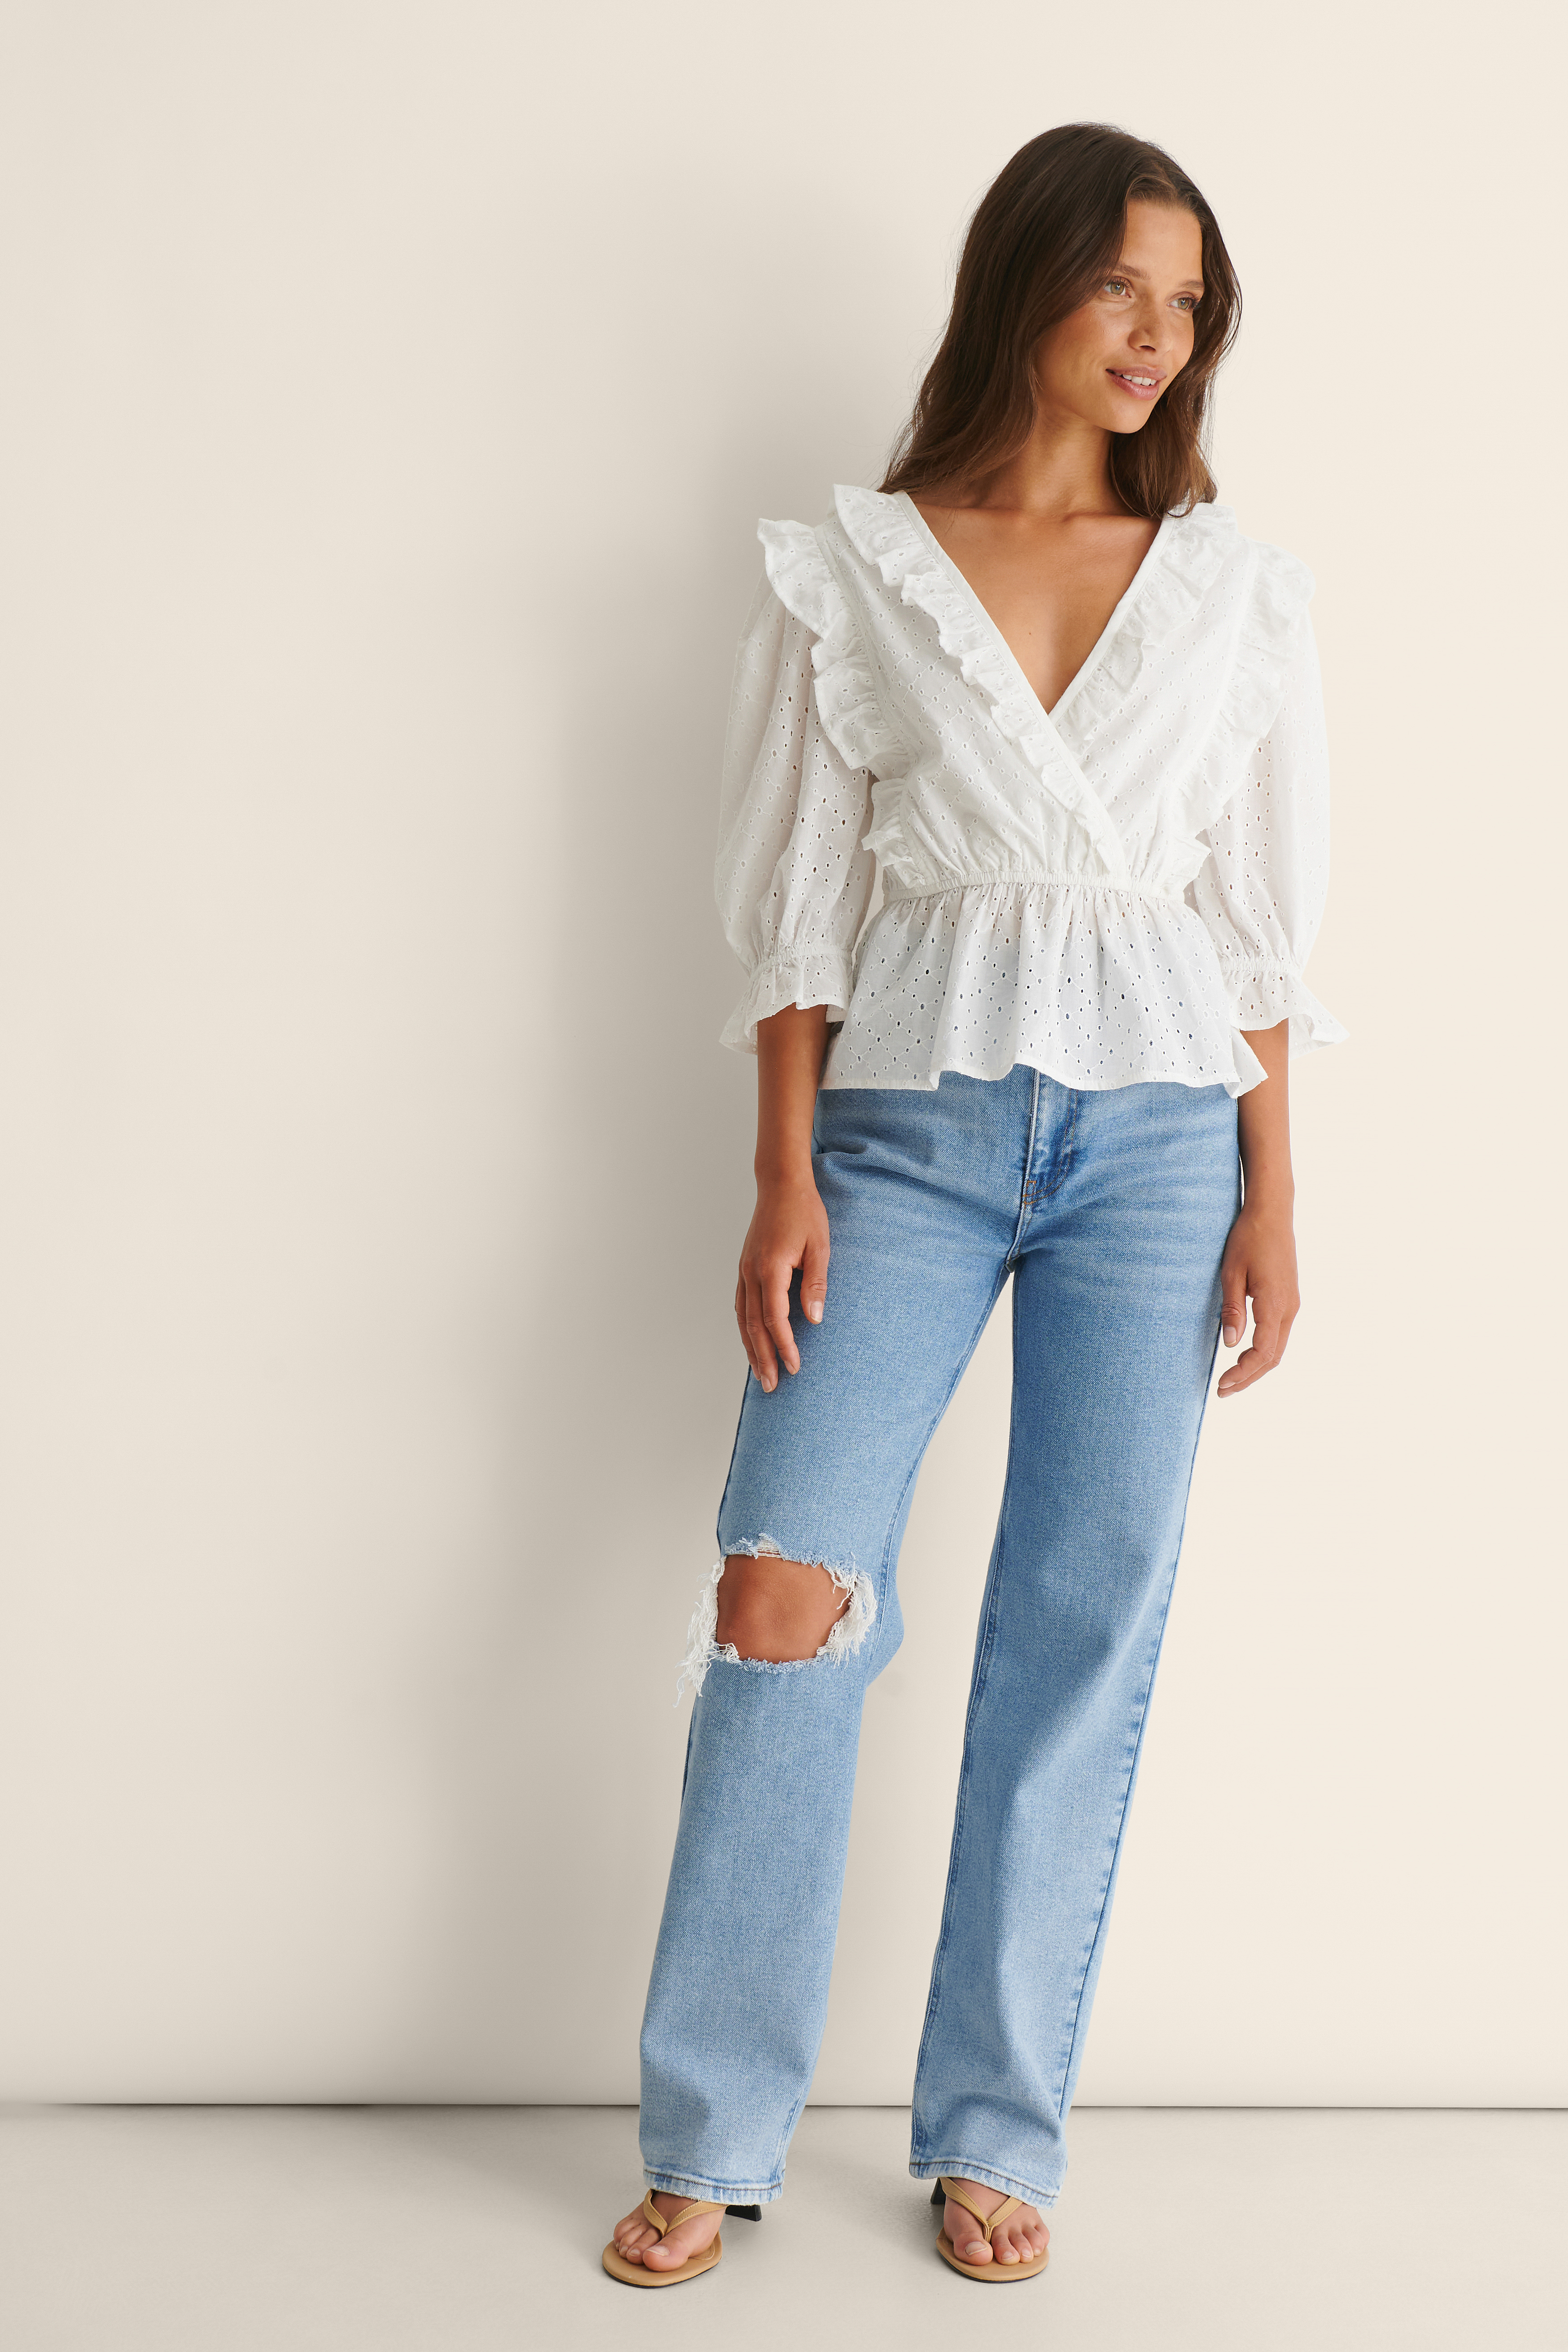 Short Sleeve Anglaise Top Outfit.